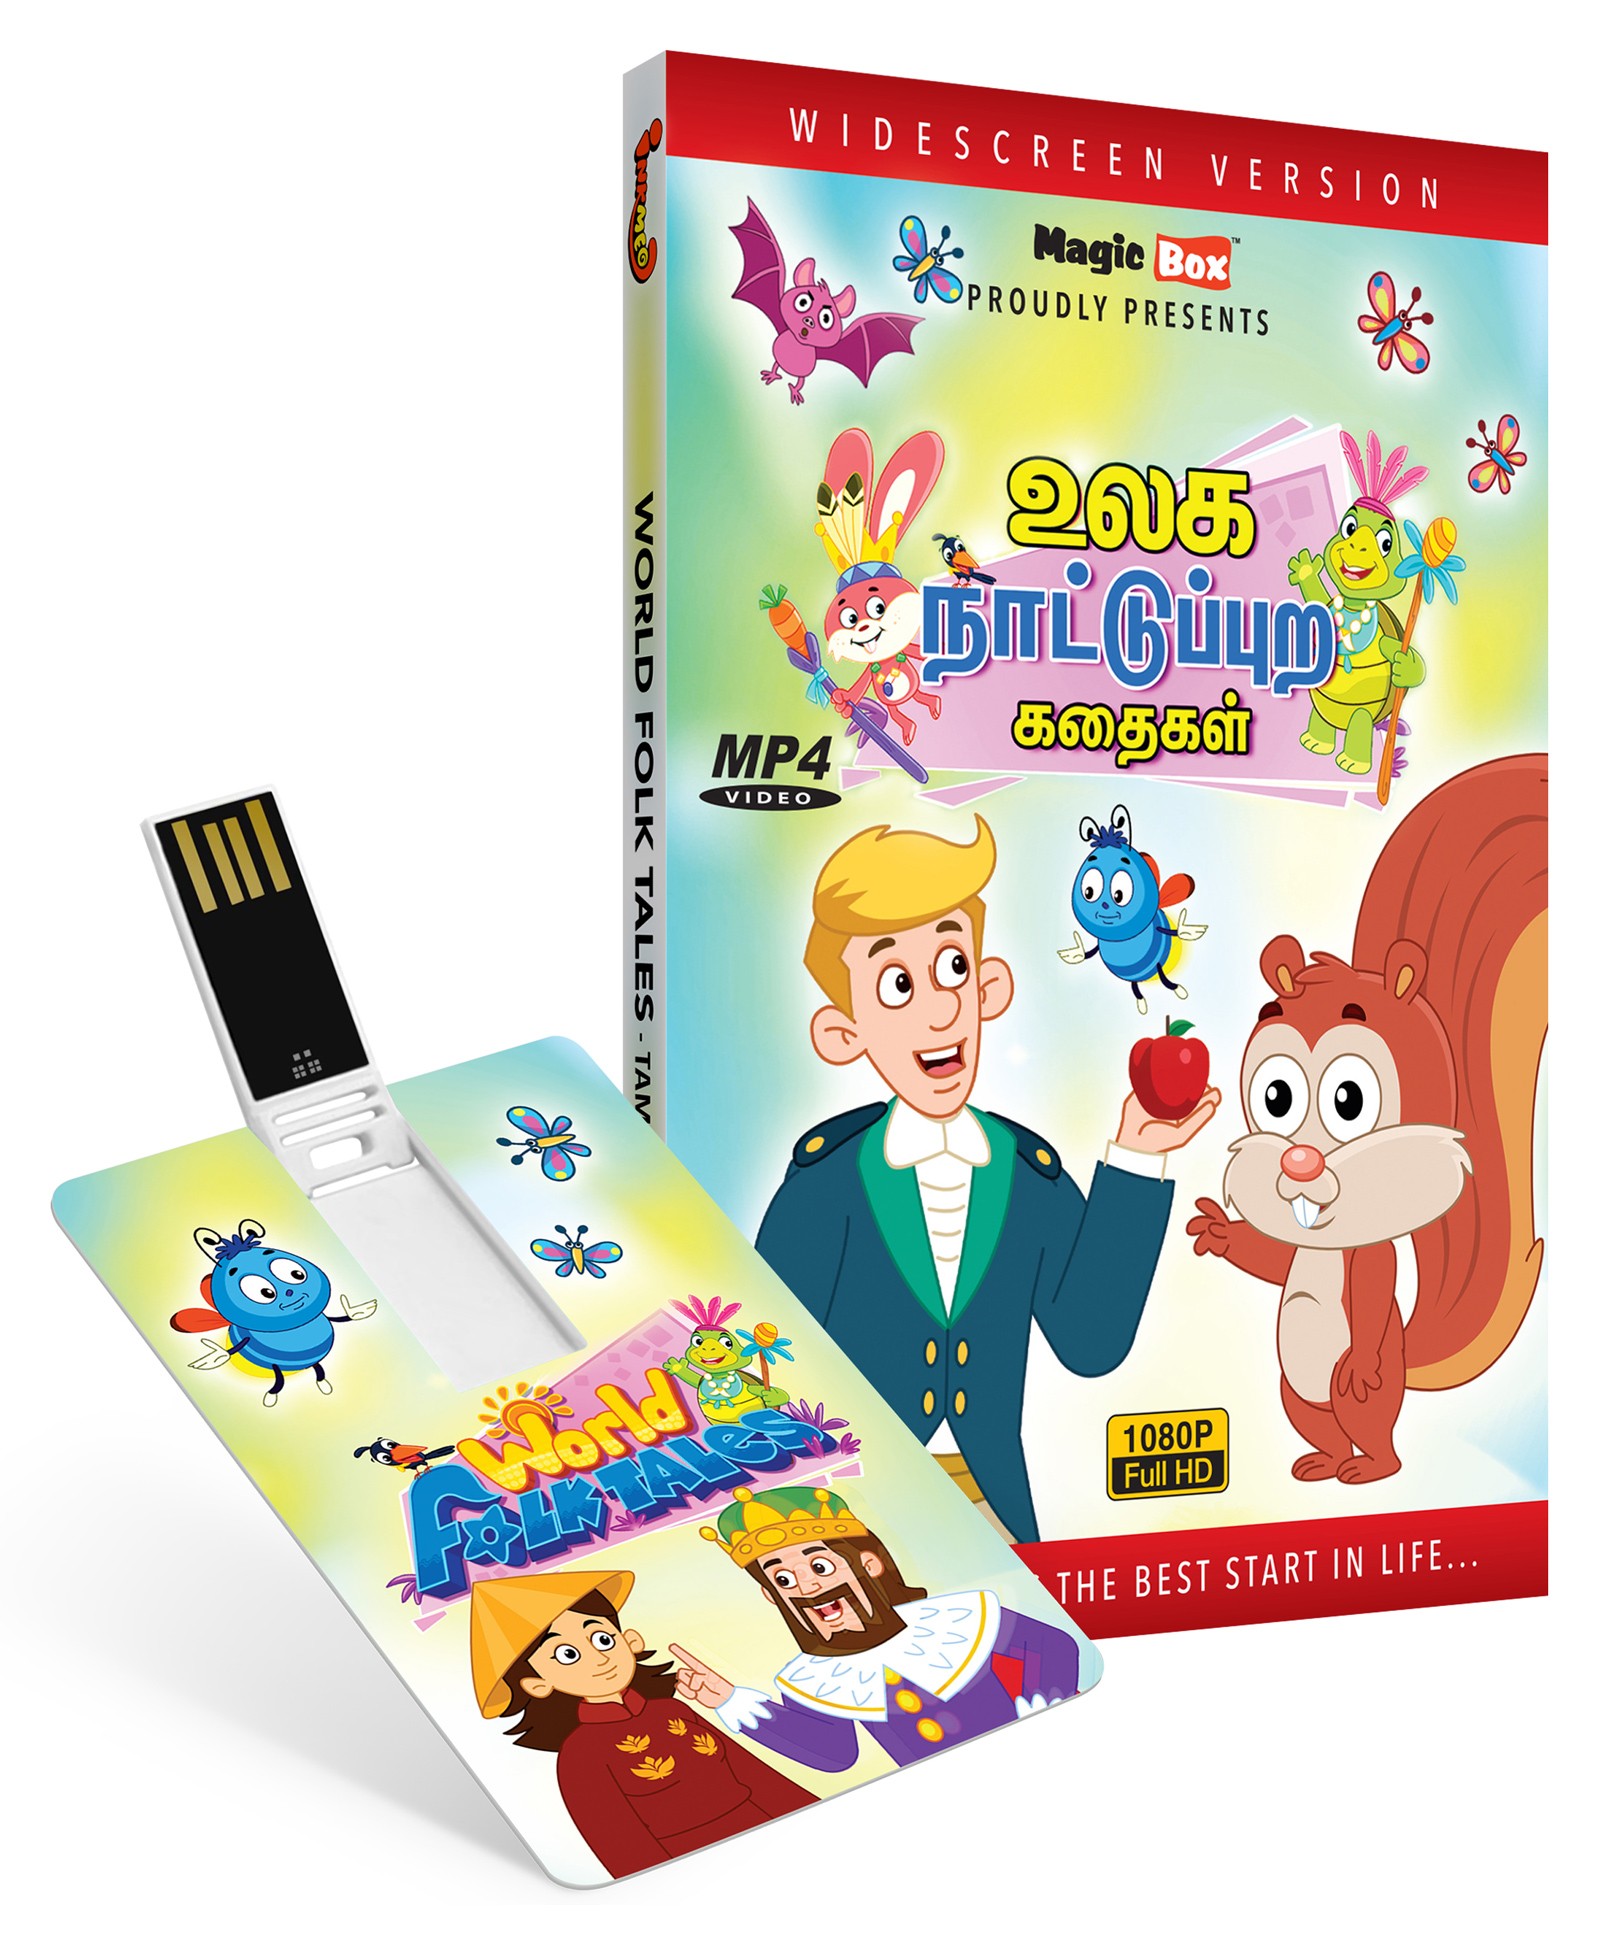 Inkmeo World Folk Tales 8 GB USB Pendrive Animated Movie - Tamil Online in  India, Buy at Best Price from  - 8476807